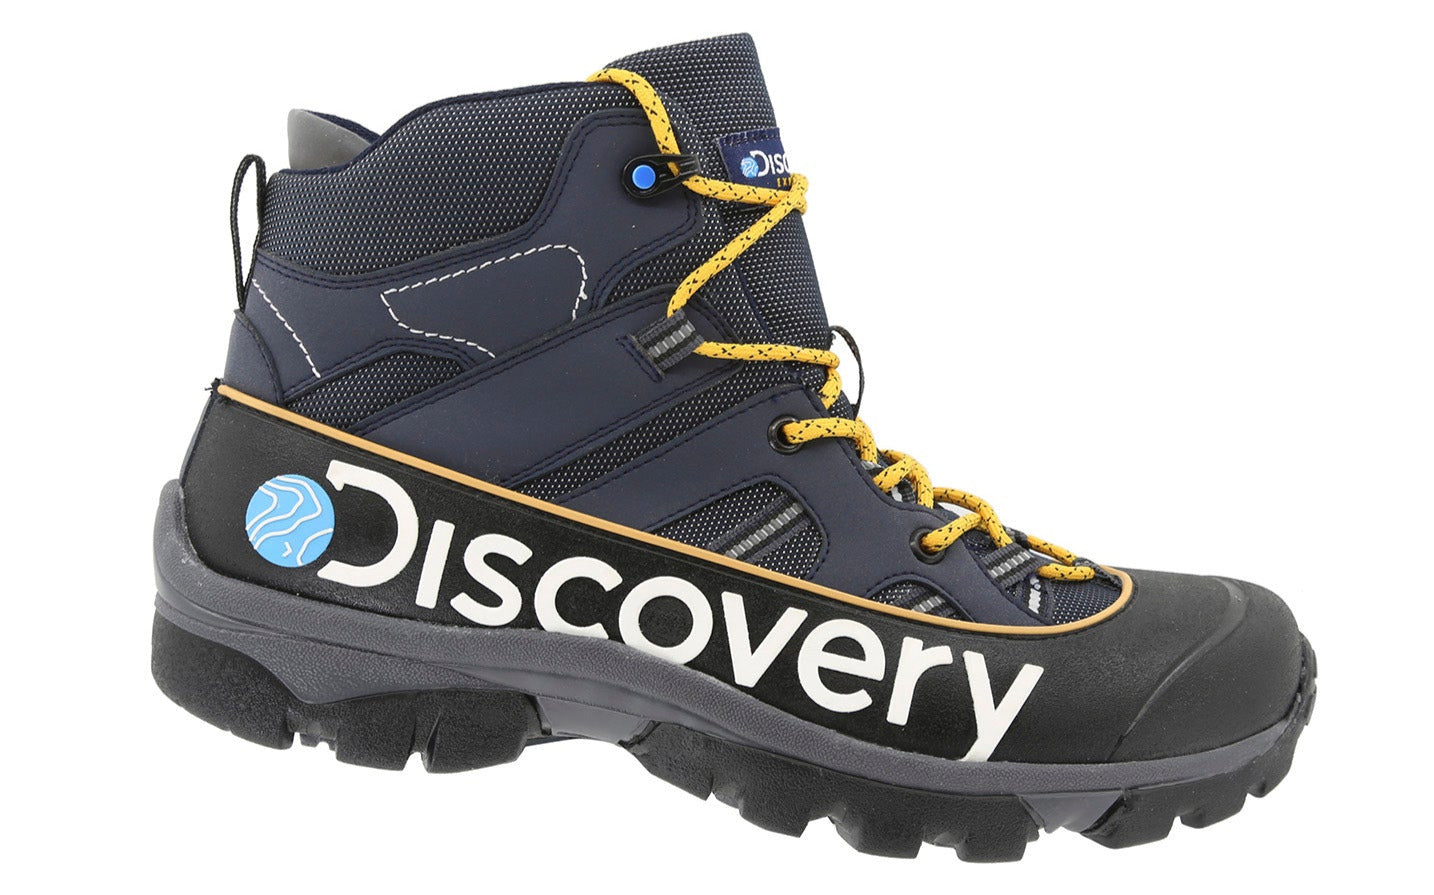 Discovery Expedition Blackwood Men's All Terrain Hiking Boots in Blue - Black